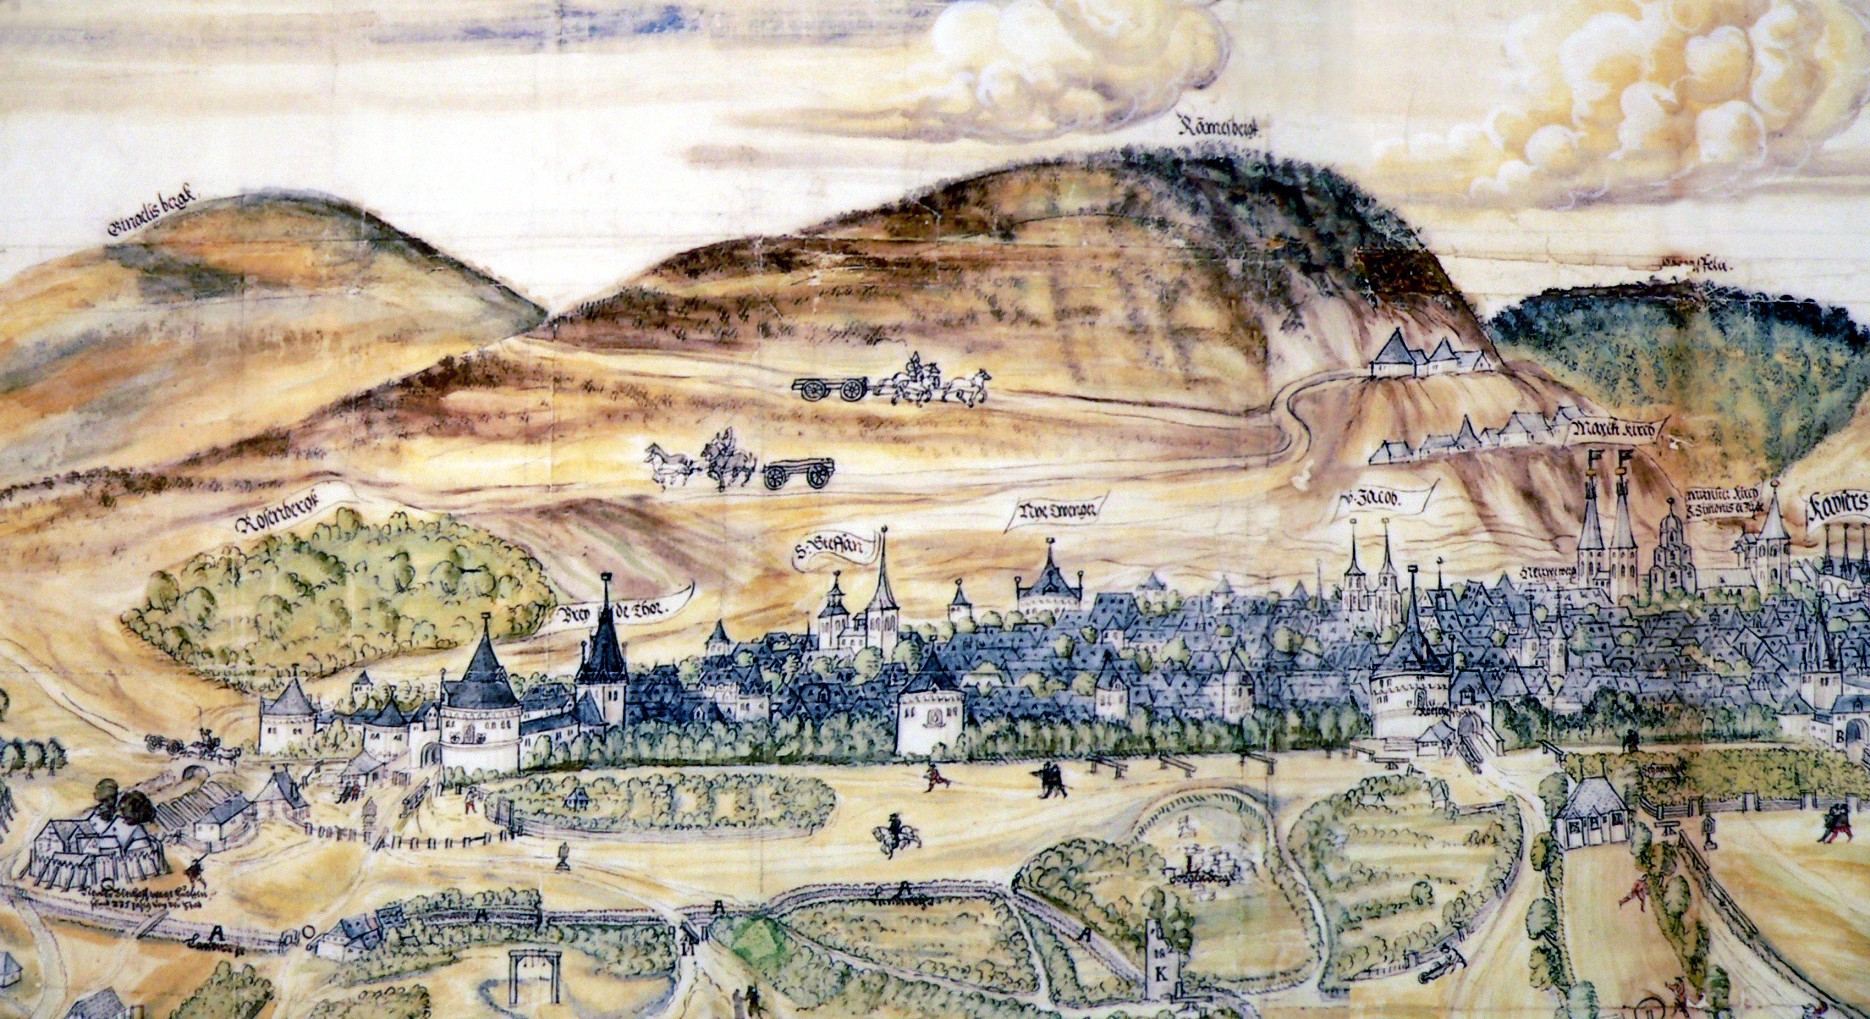 Imperial City of Goslar and Rammelsberg, 1574 depiction